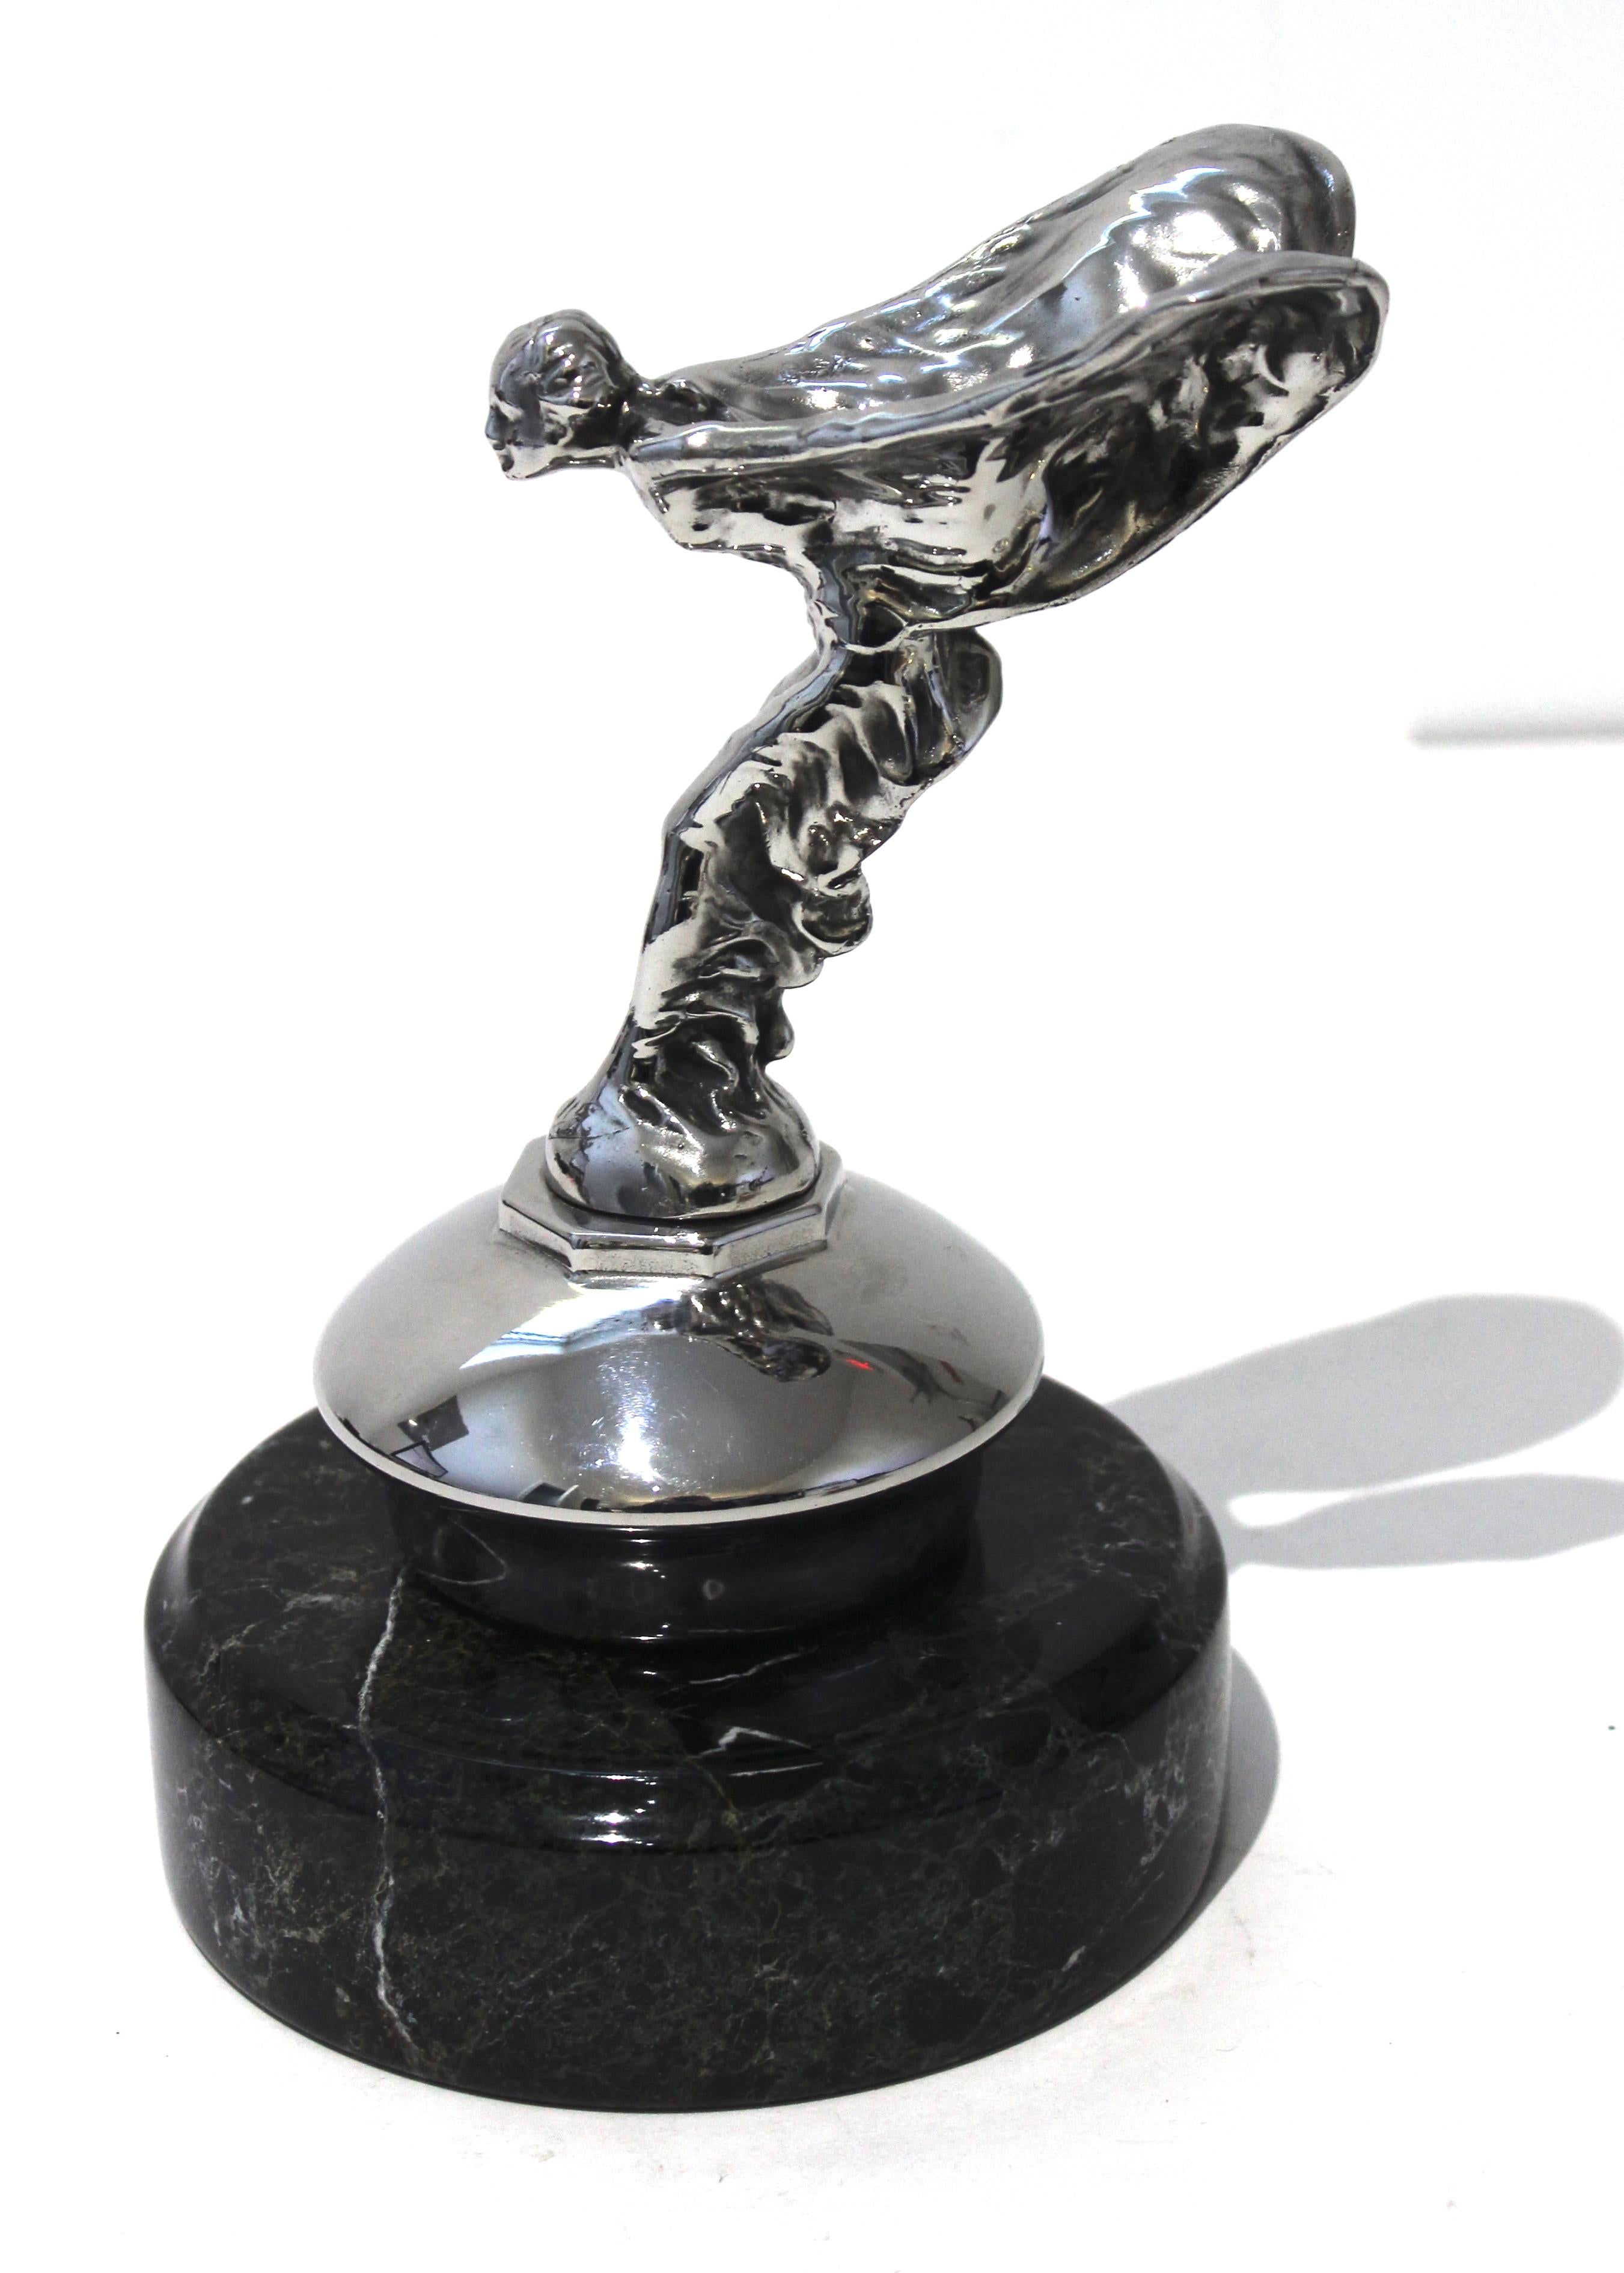 what is the rolls royce hood ornament called